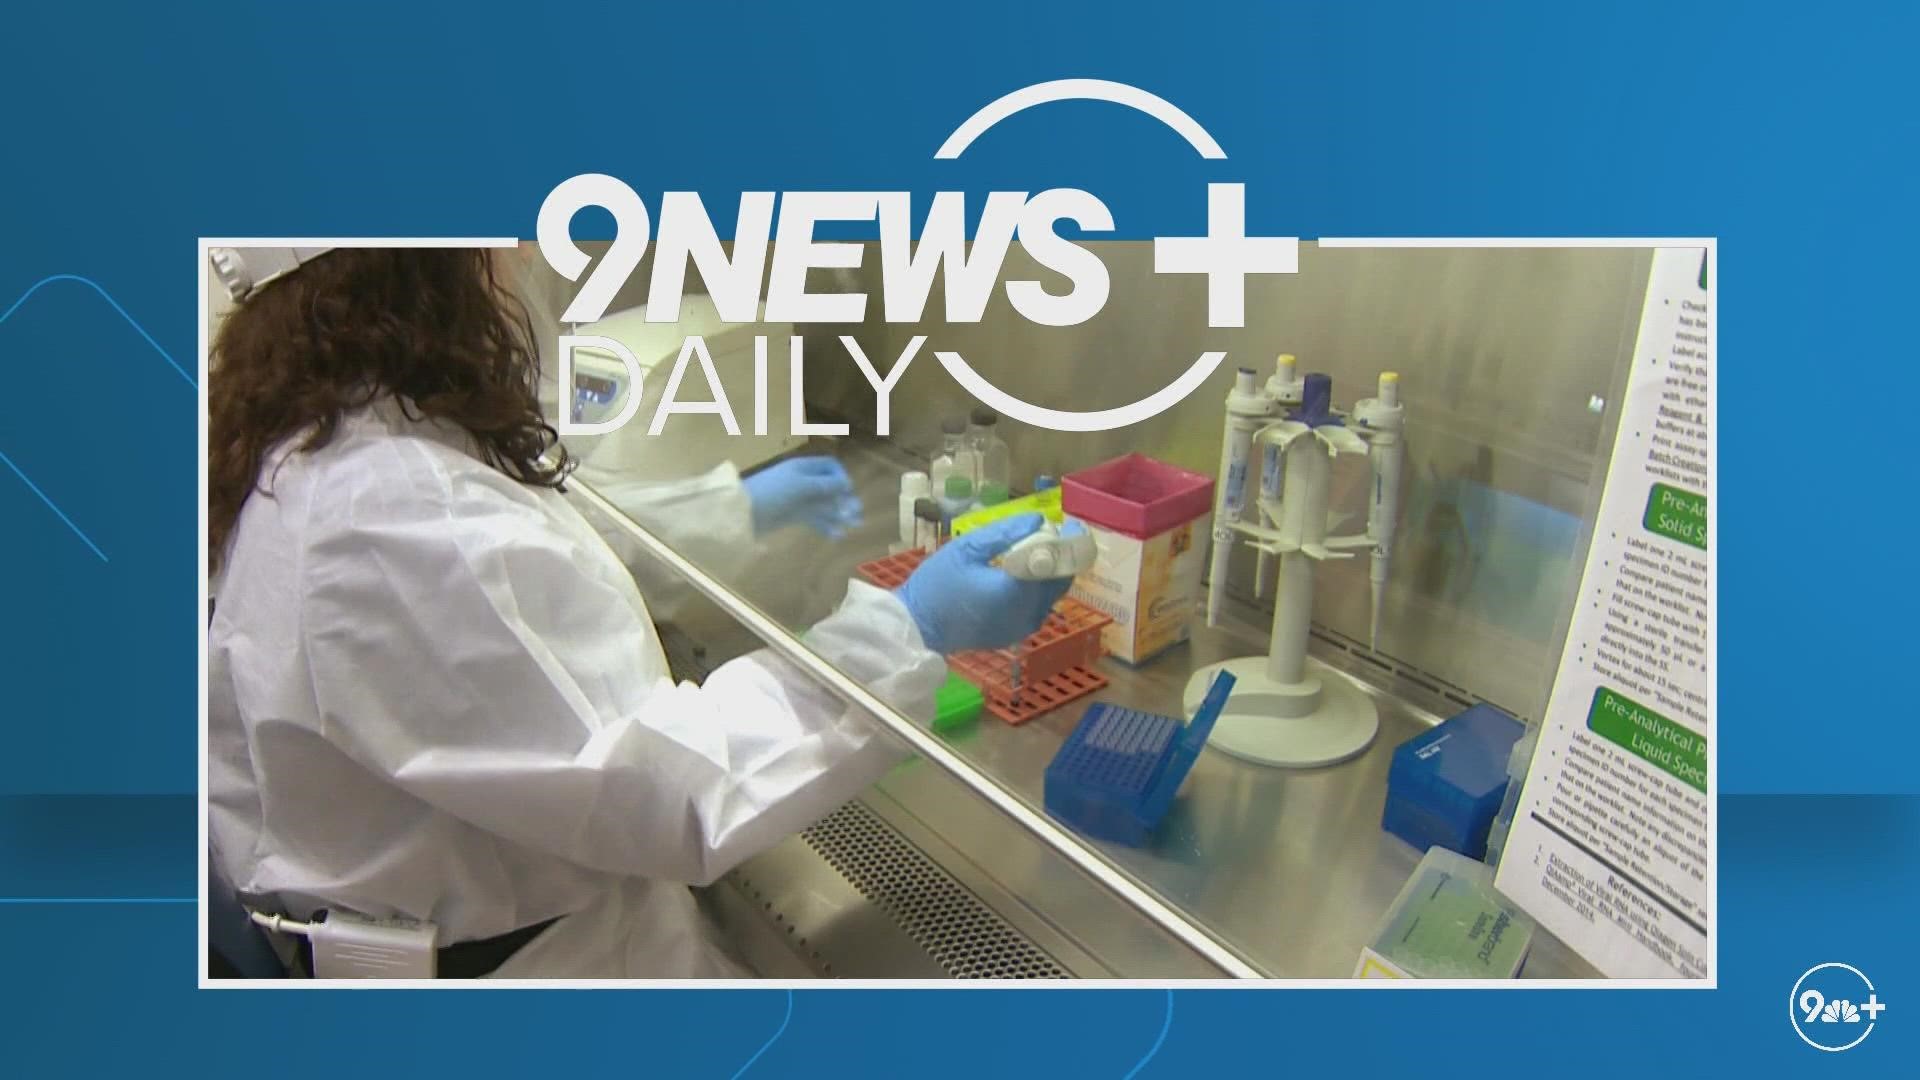 Dr. Ricardo González-Fisher joined 9NEWS to talk about the new BA.5 omicron variant, which he says is now the most prevalent variant in the United States.